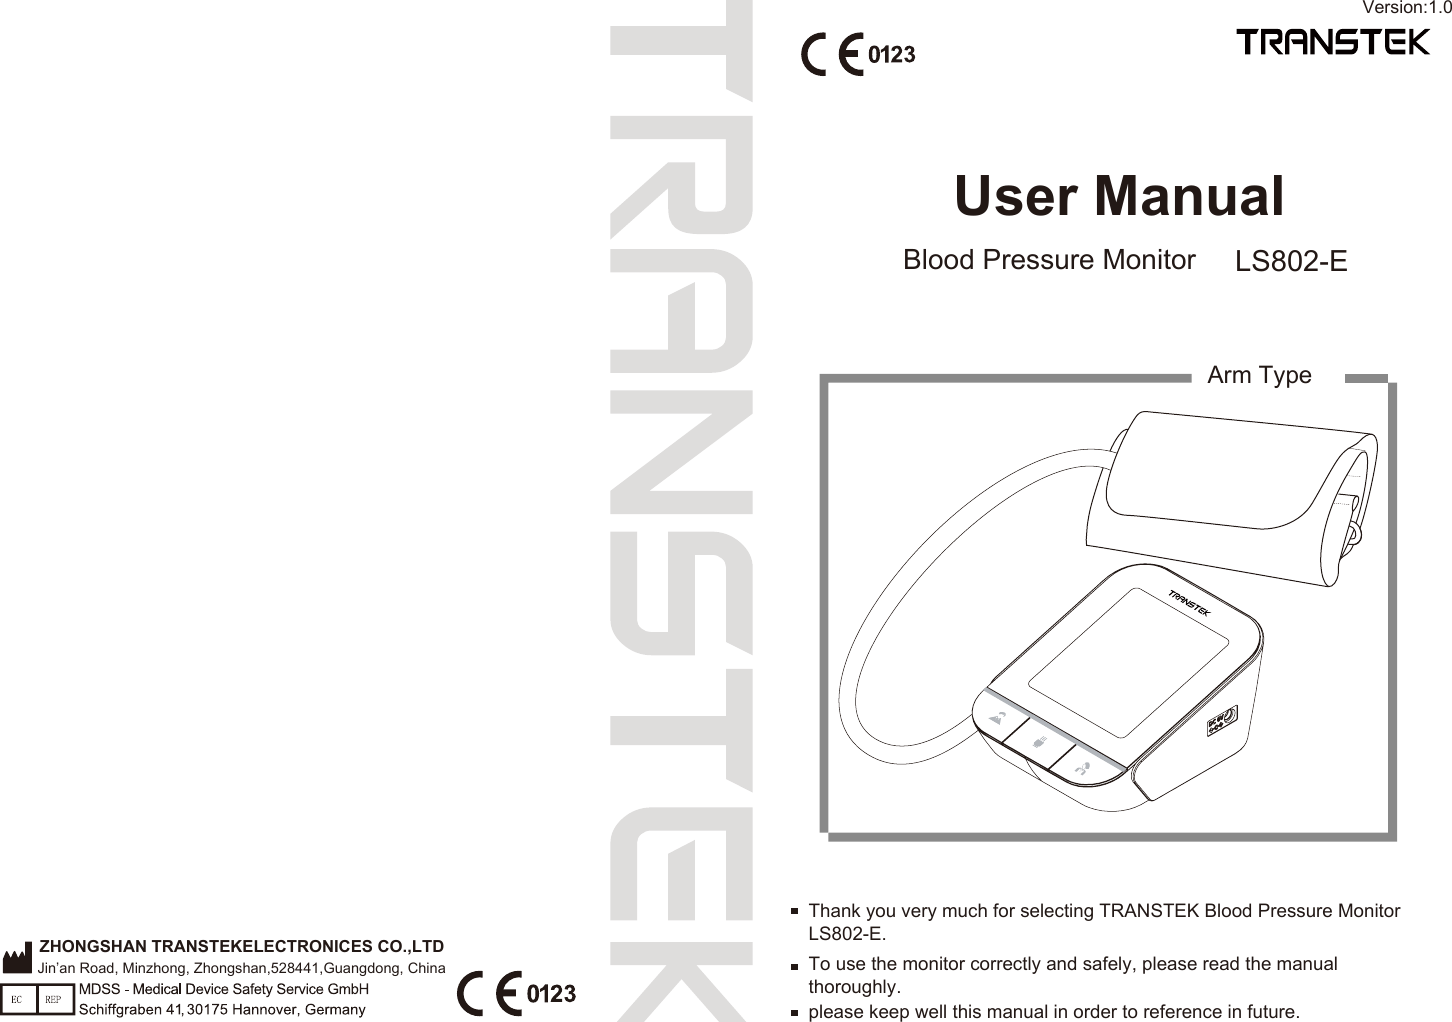 User ManualBlood Pressure Monitor LS802-ETo use the monitor correctly and safely, please read the manual thoroughly.Thank you very much for selecting TRANSTEK Blood Pressure Monitor LS802-E.please keep well this manual in order to reference in future.ZHONGSHAN TRANSTEKELECTRONICES CO.,LTDArm TypeJin’an Road, Minzhong, Zhongshan,528441,Guangdong, ChinaVersion:1.0